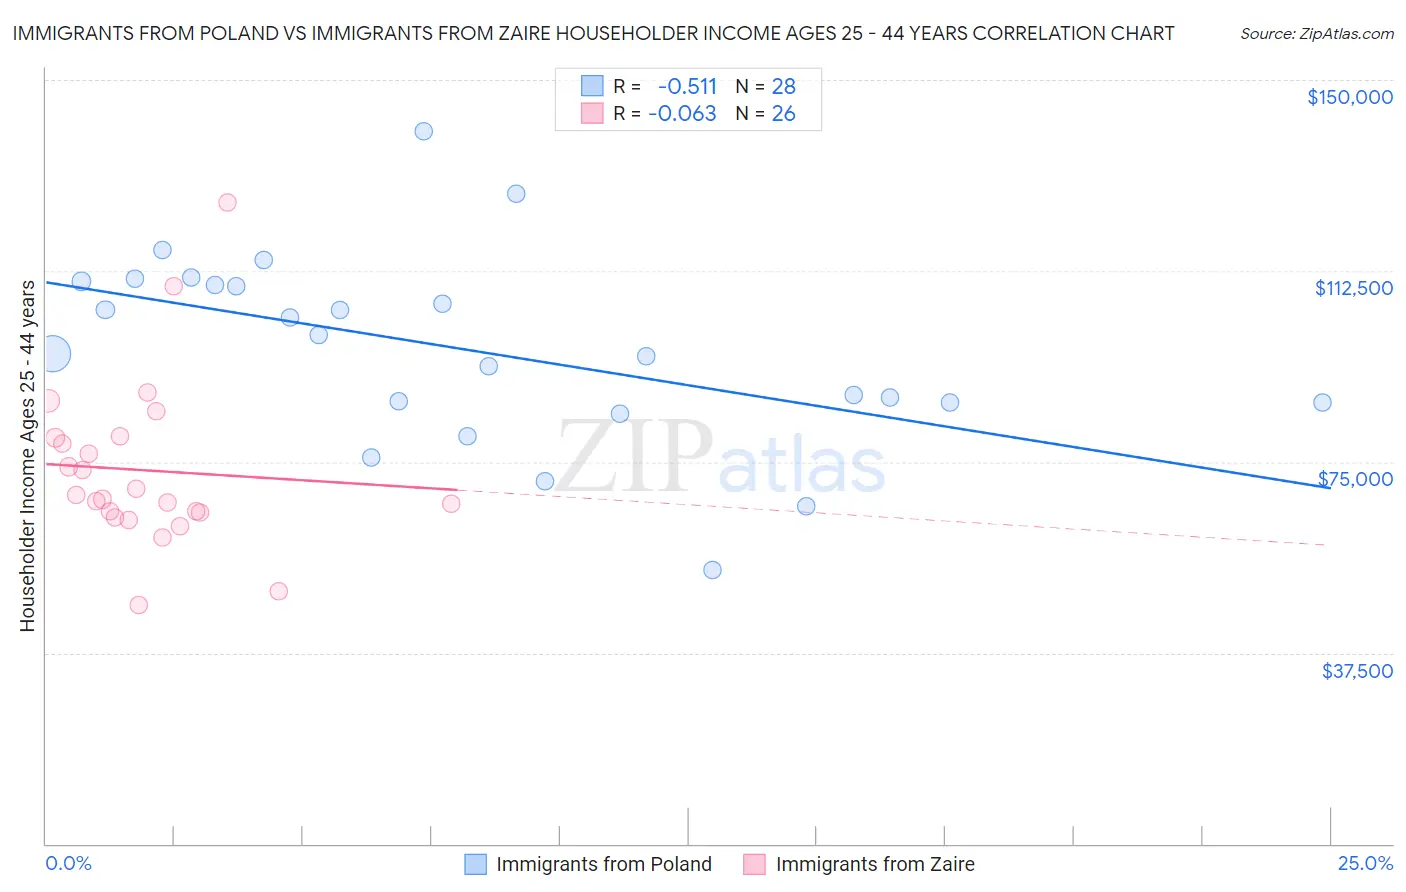 Immigrants from Poland vs Immigrants from Zaire Householder Income Ages 25 - 44 years